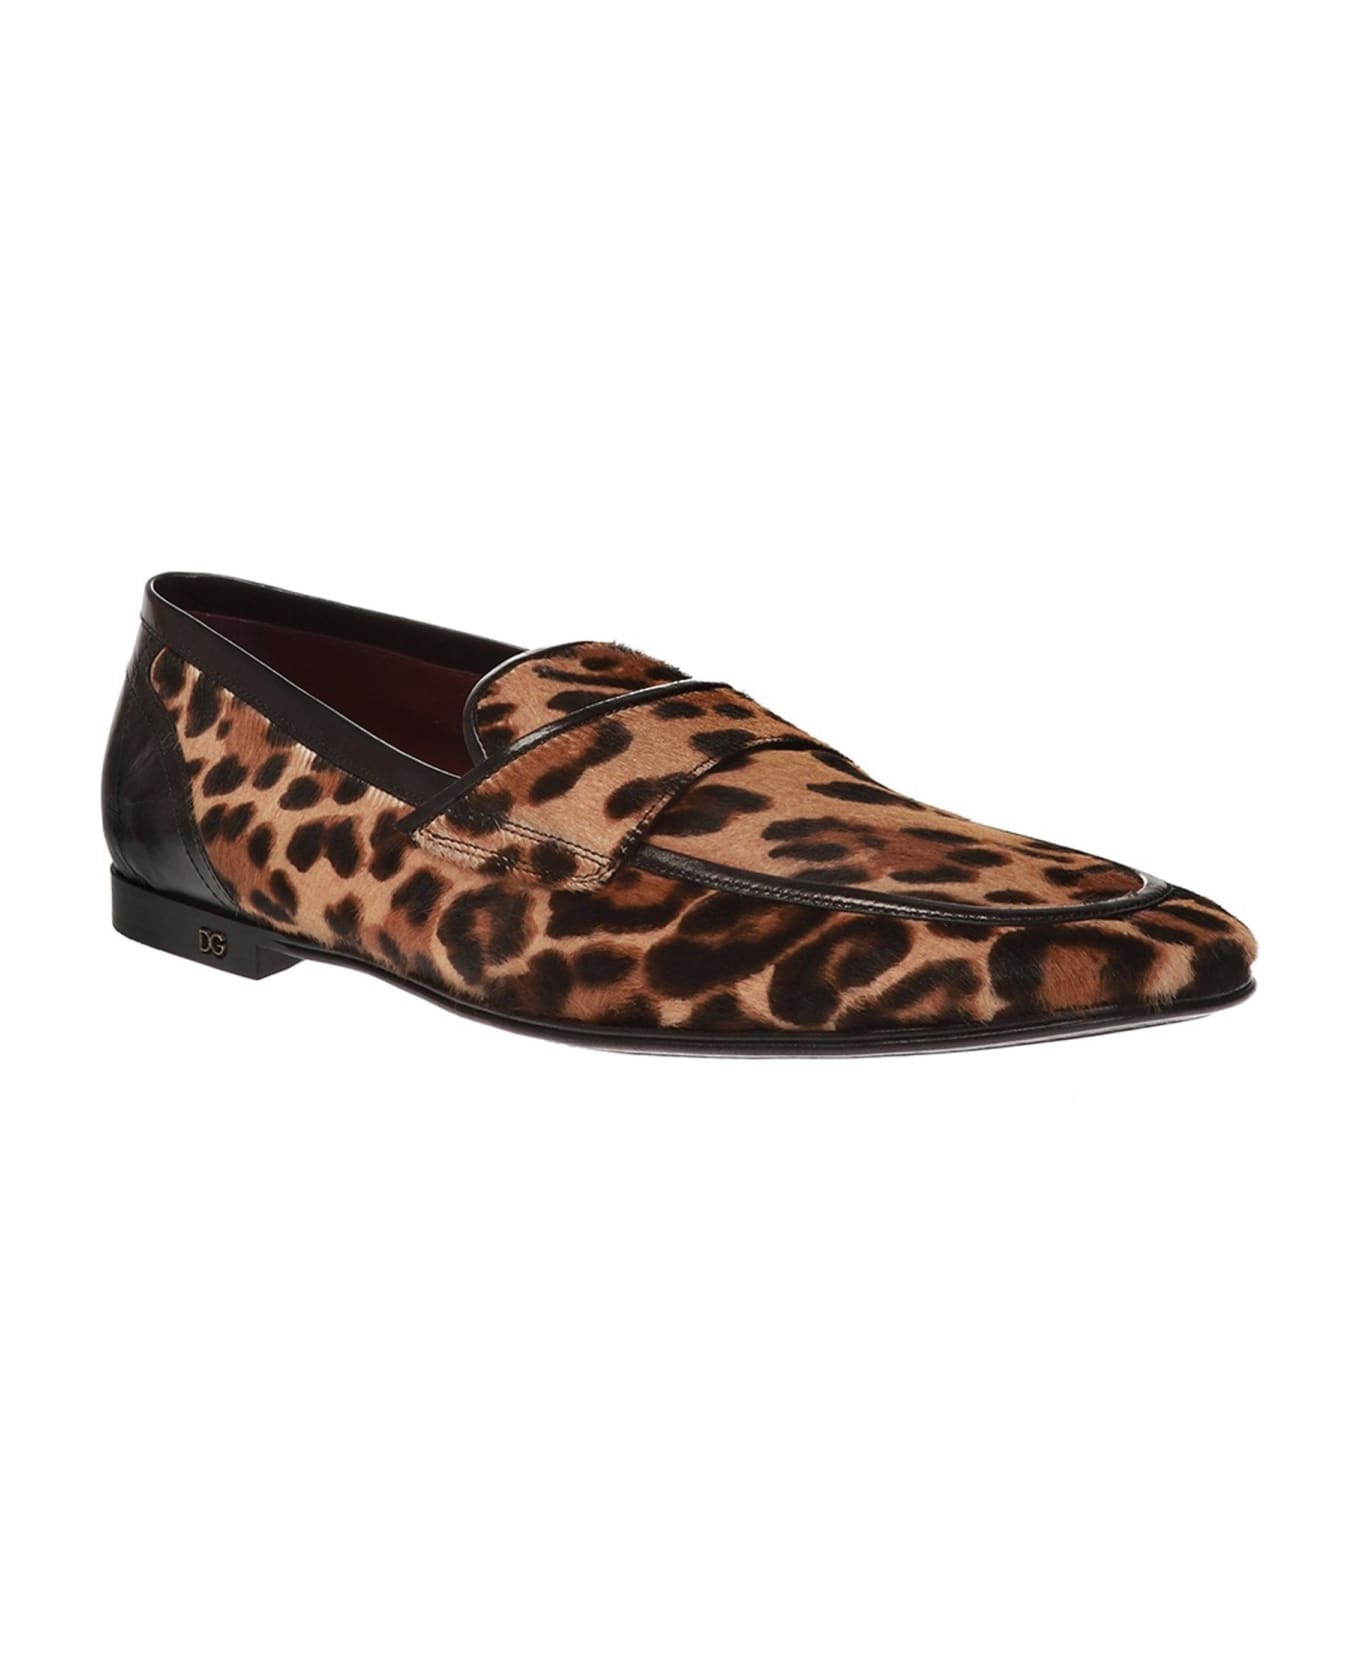 Dolce & Gabbana Leopard Print Pony Hair Loafers - Brown